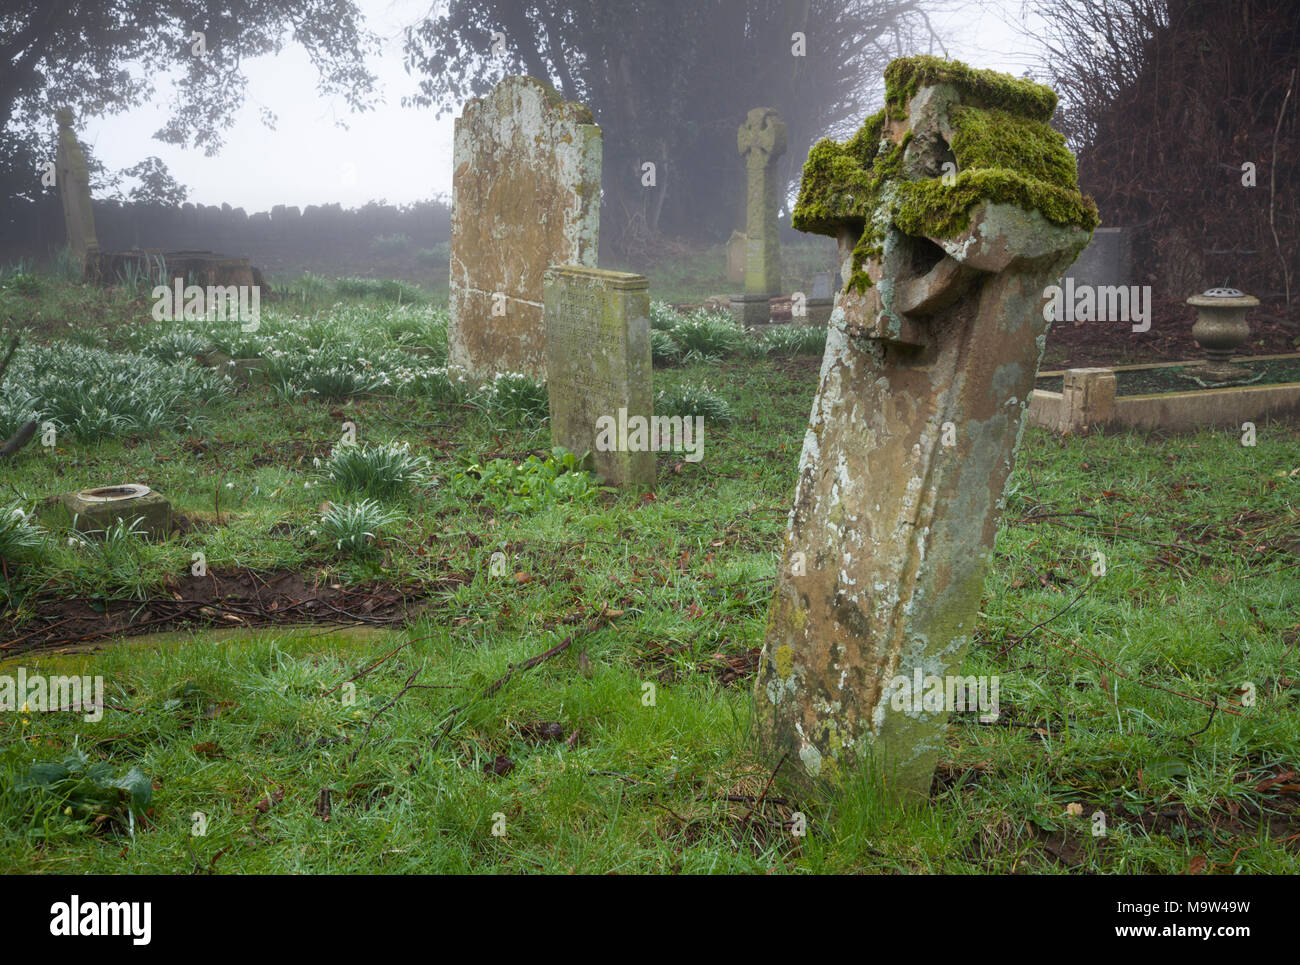 A foggy morning among the gravestones in a country churchyard, All Saints church, Holdenby, Northamptonshire, England. Stock Photo